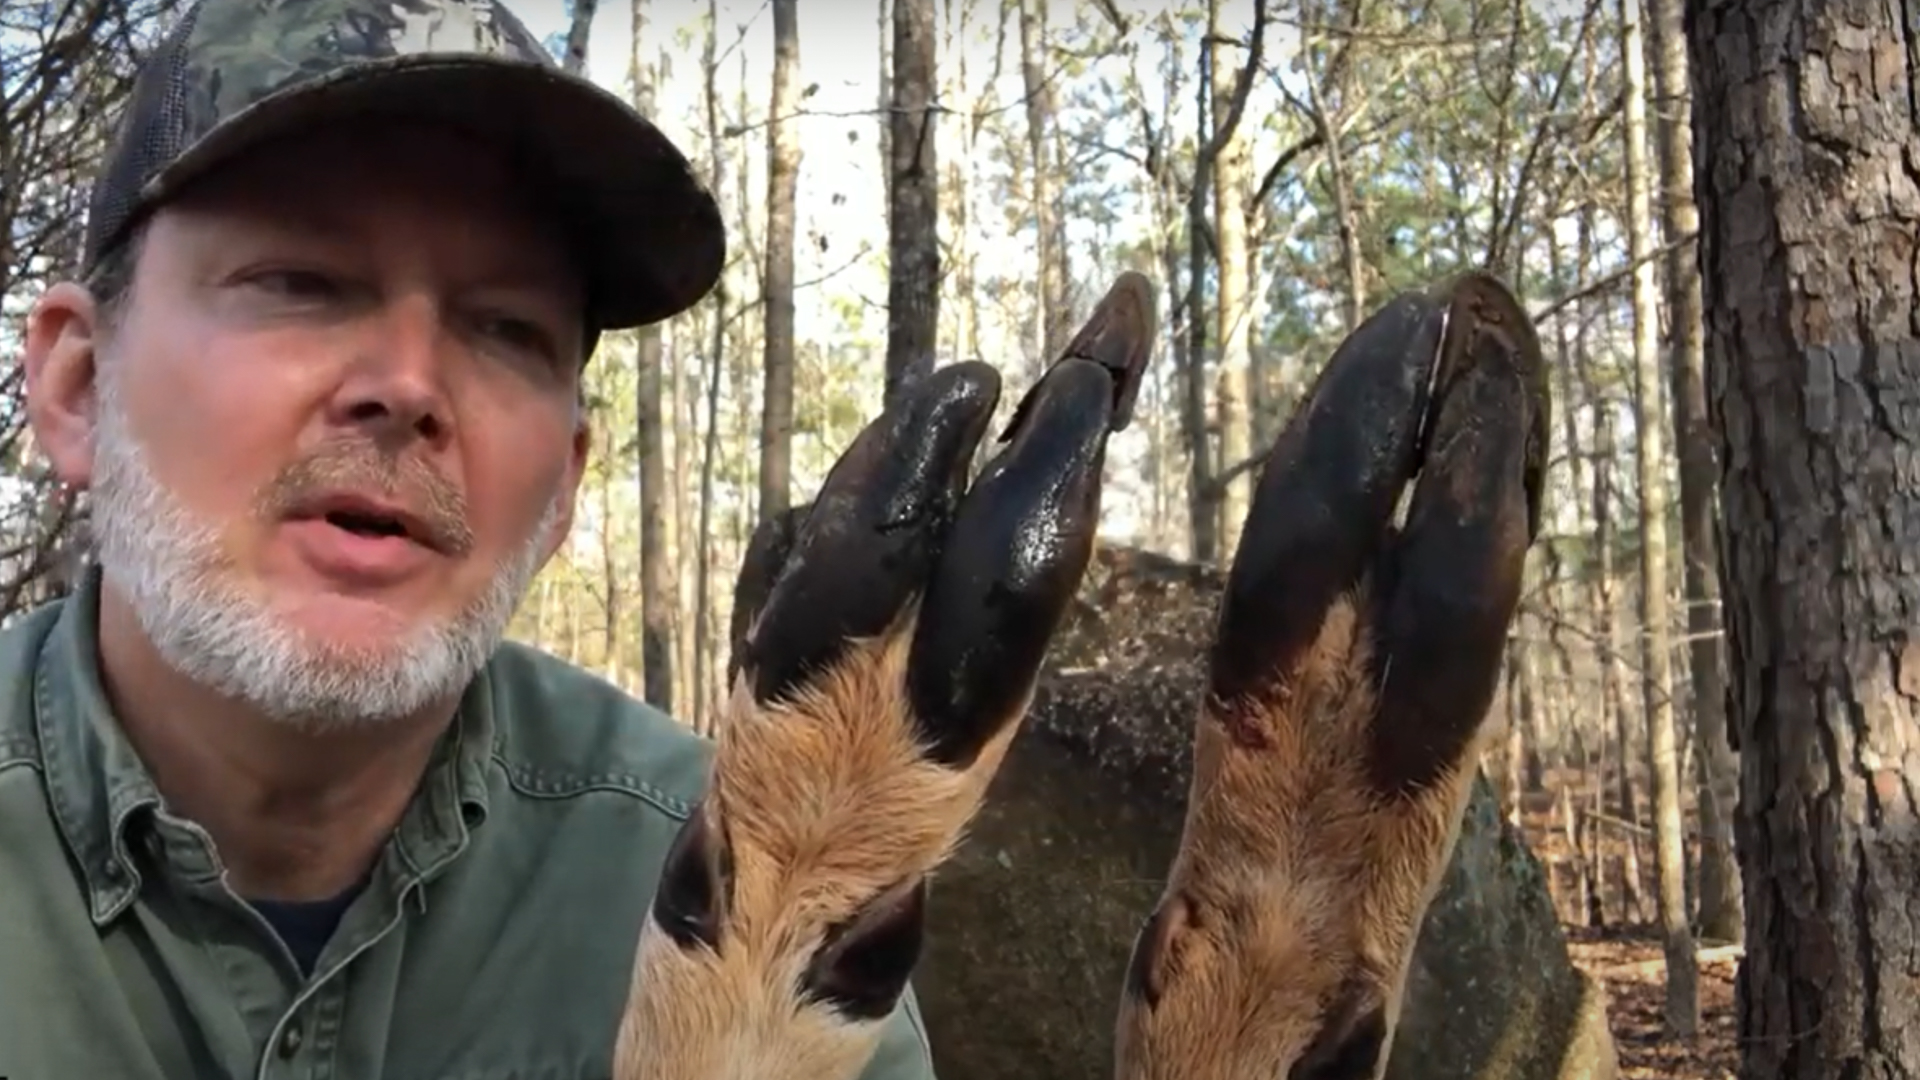 Cracked Deer Hooves: What Does It Mean?